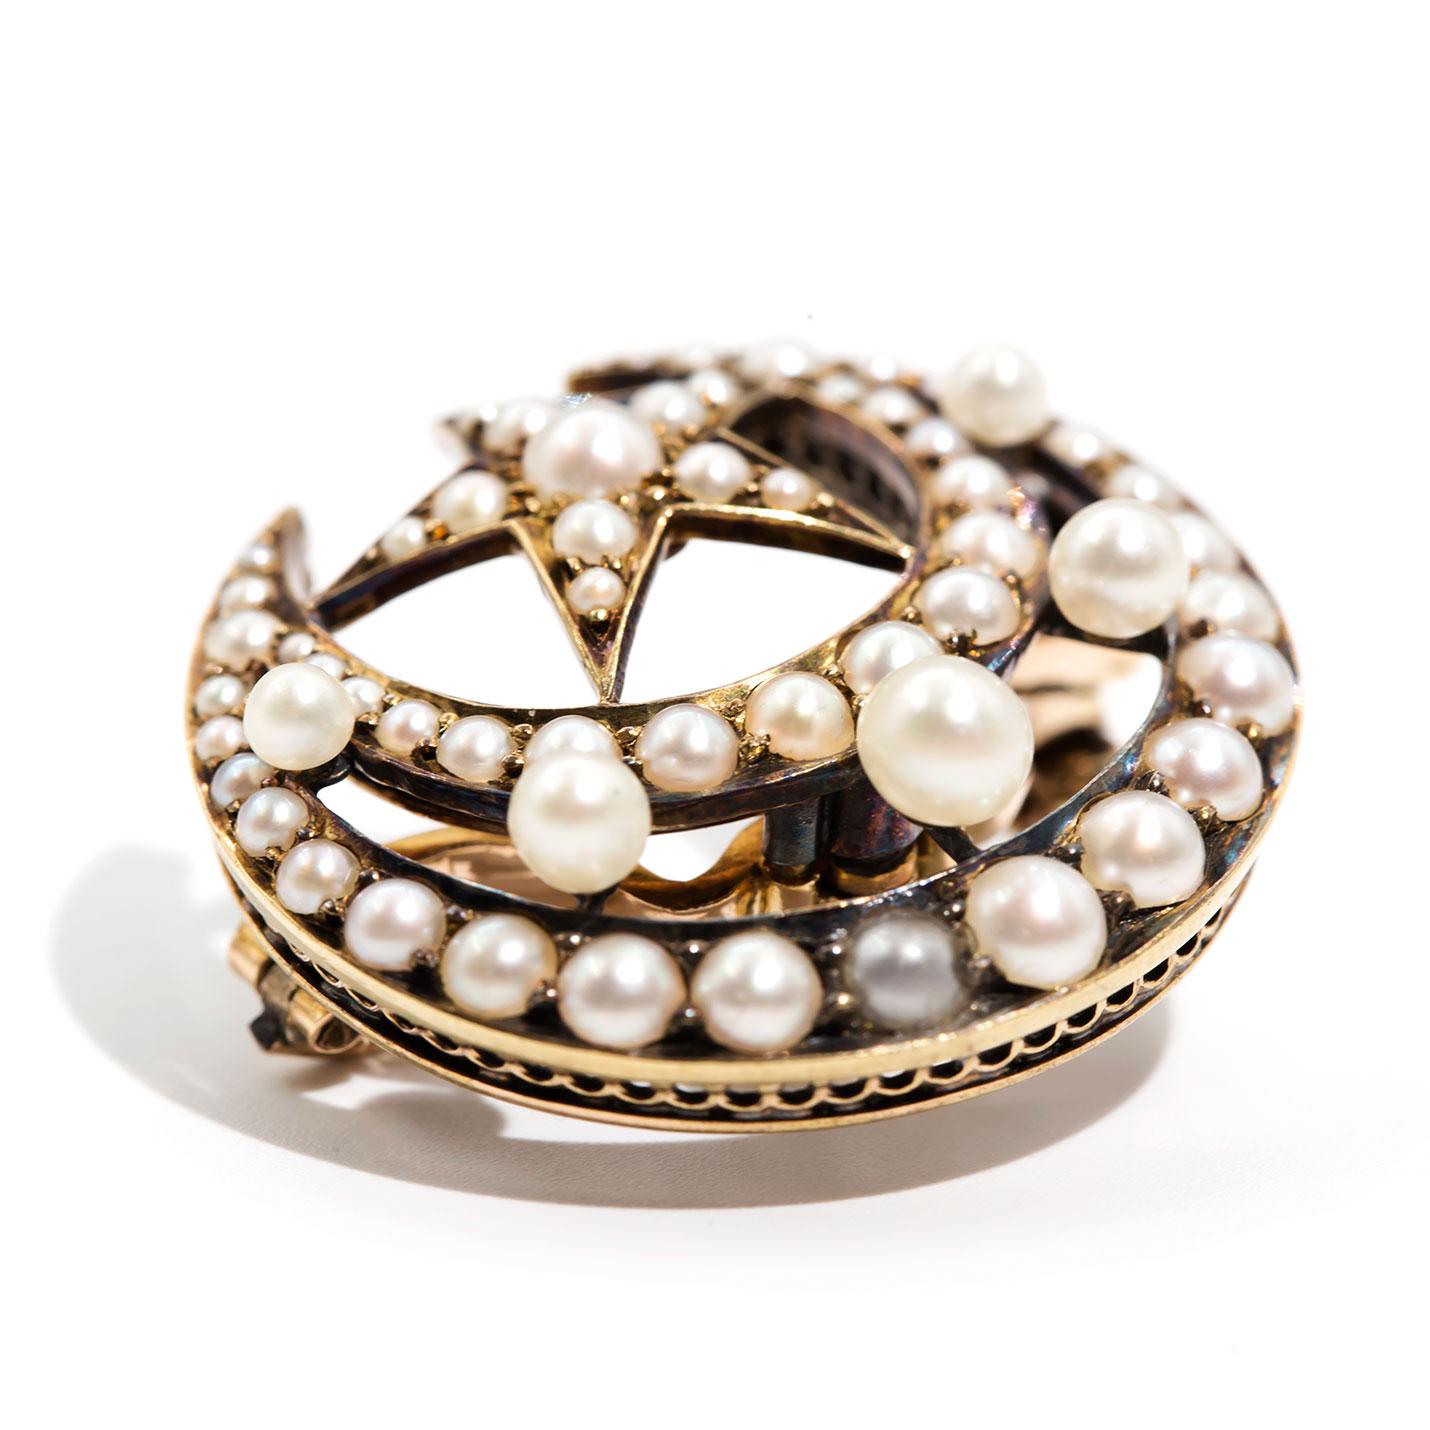 Victorian Antique 19th Century White Pearl 15 Carat Gold Brooch 9